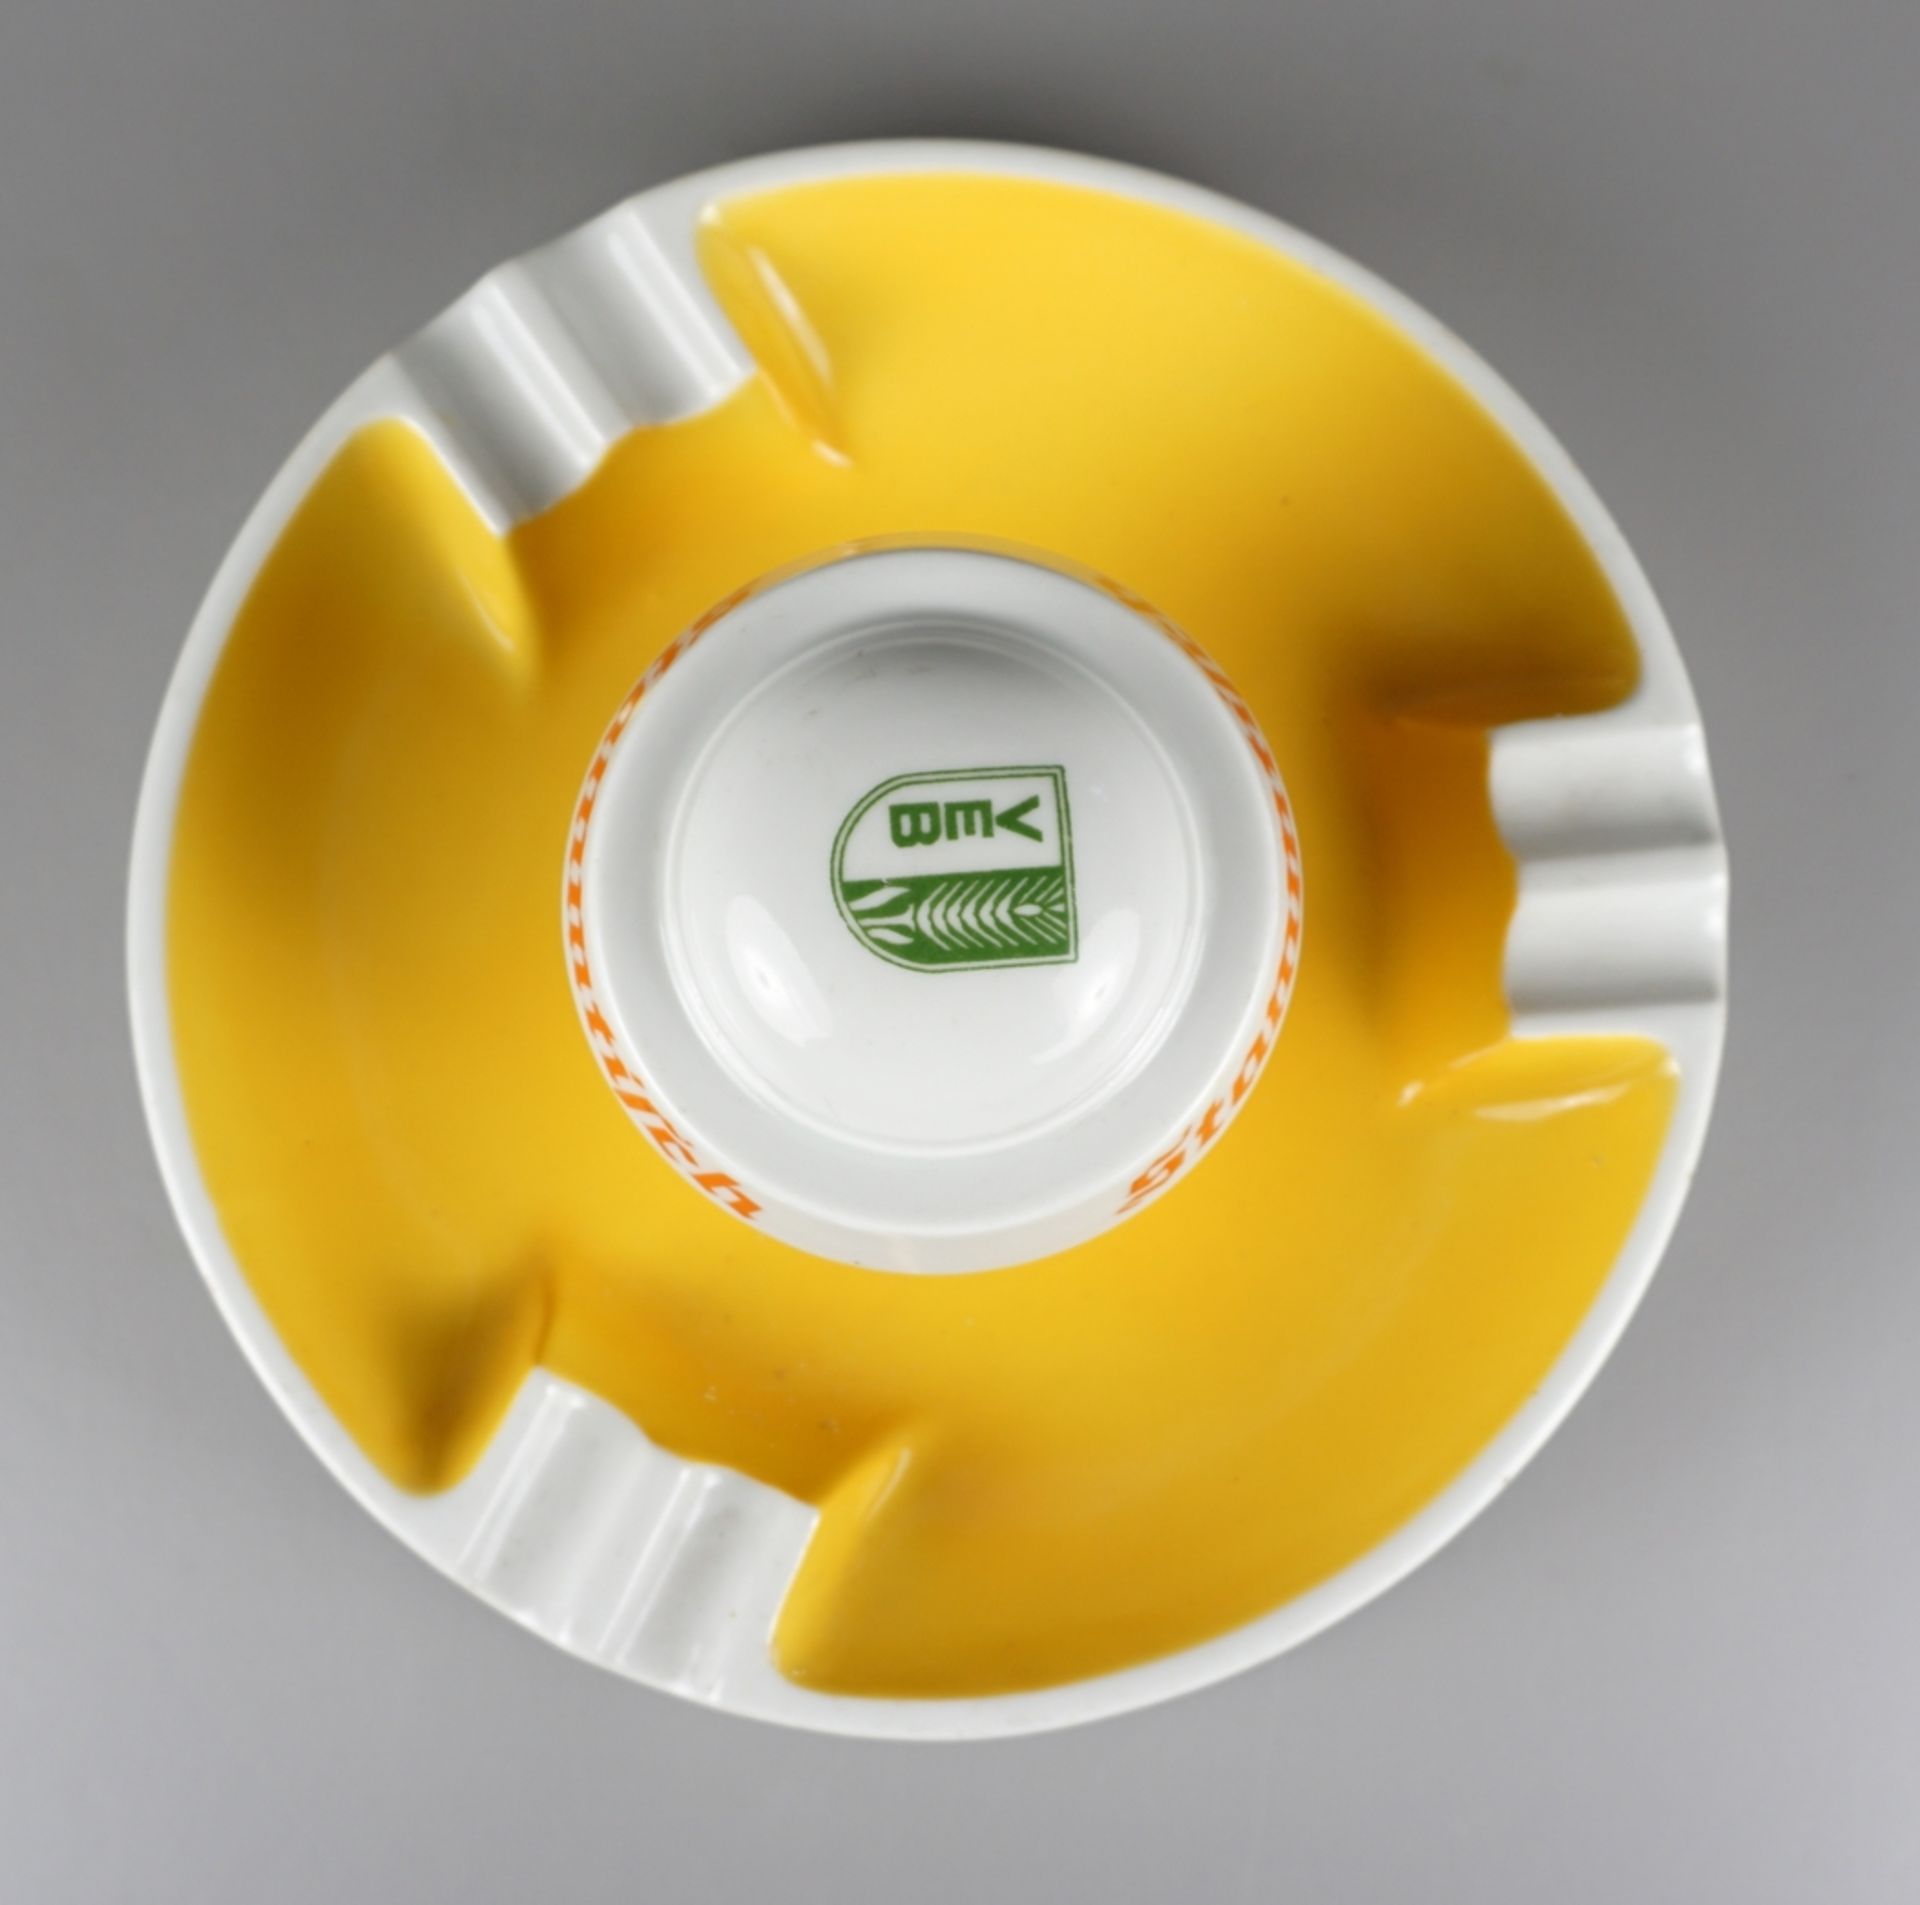 Large regulars` table ashtray "Schultheiß-Brauerei Dessau", GDR, probably 1950s/1960s, d.24cm - Image 3 of 4